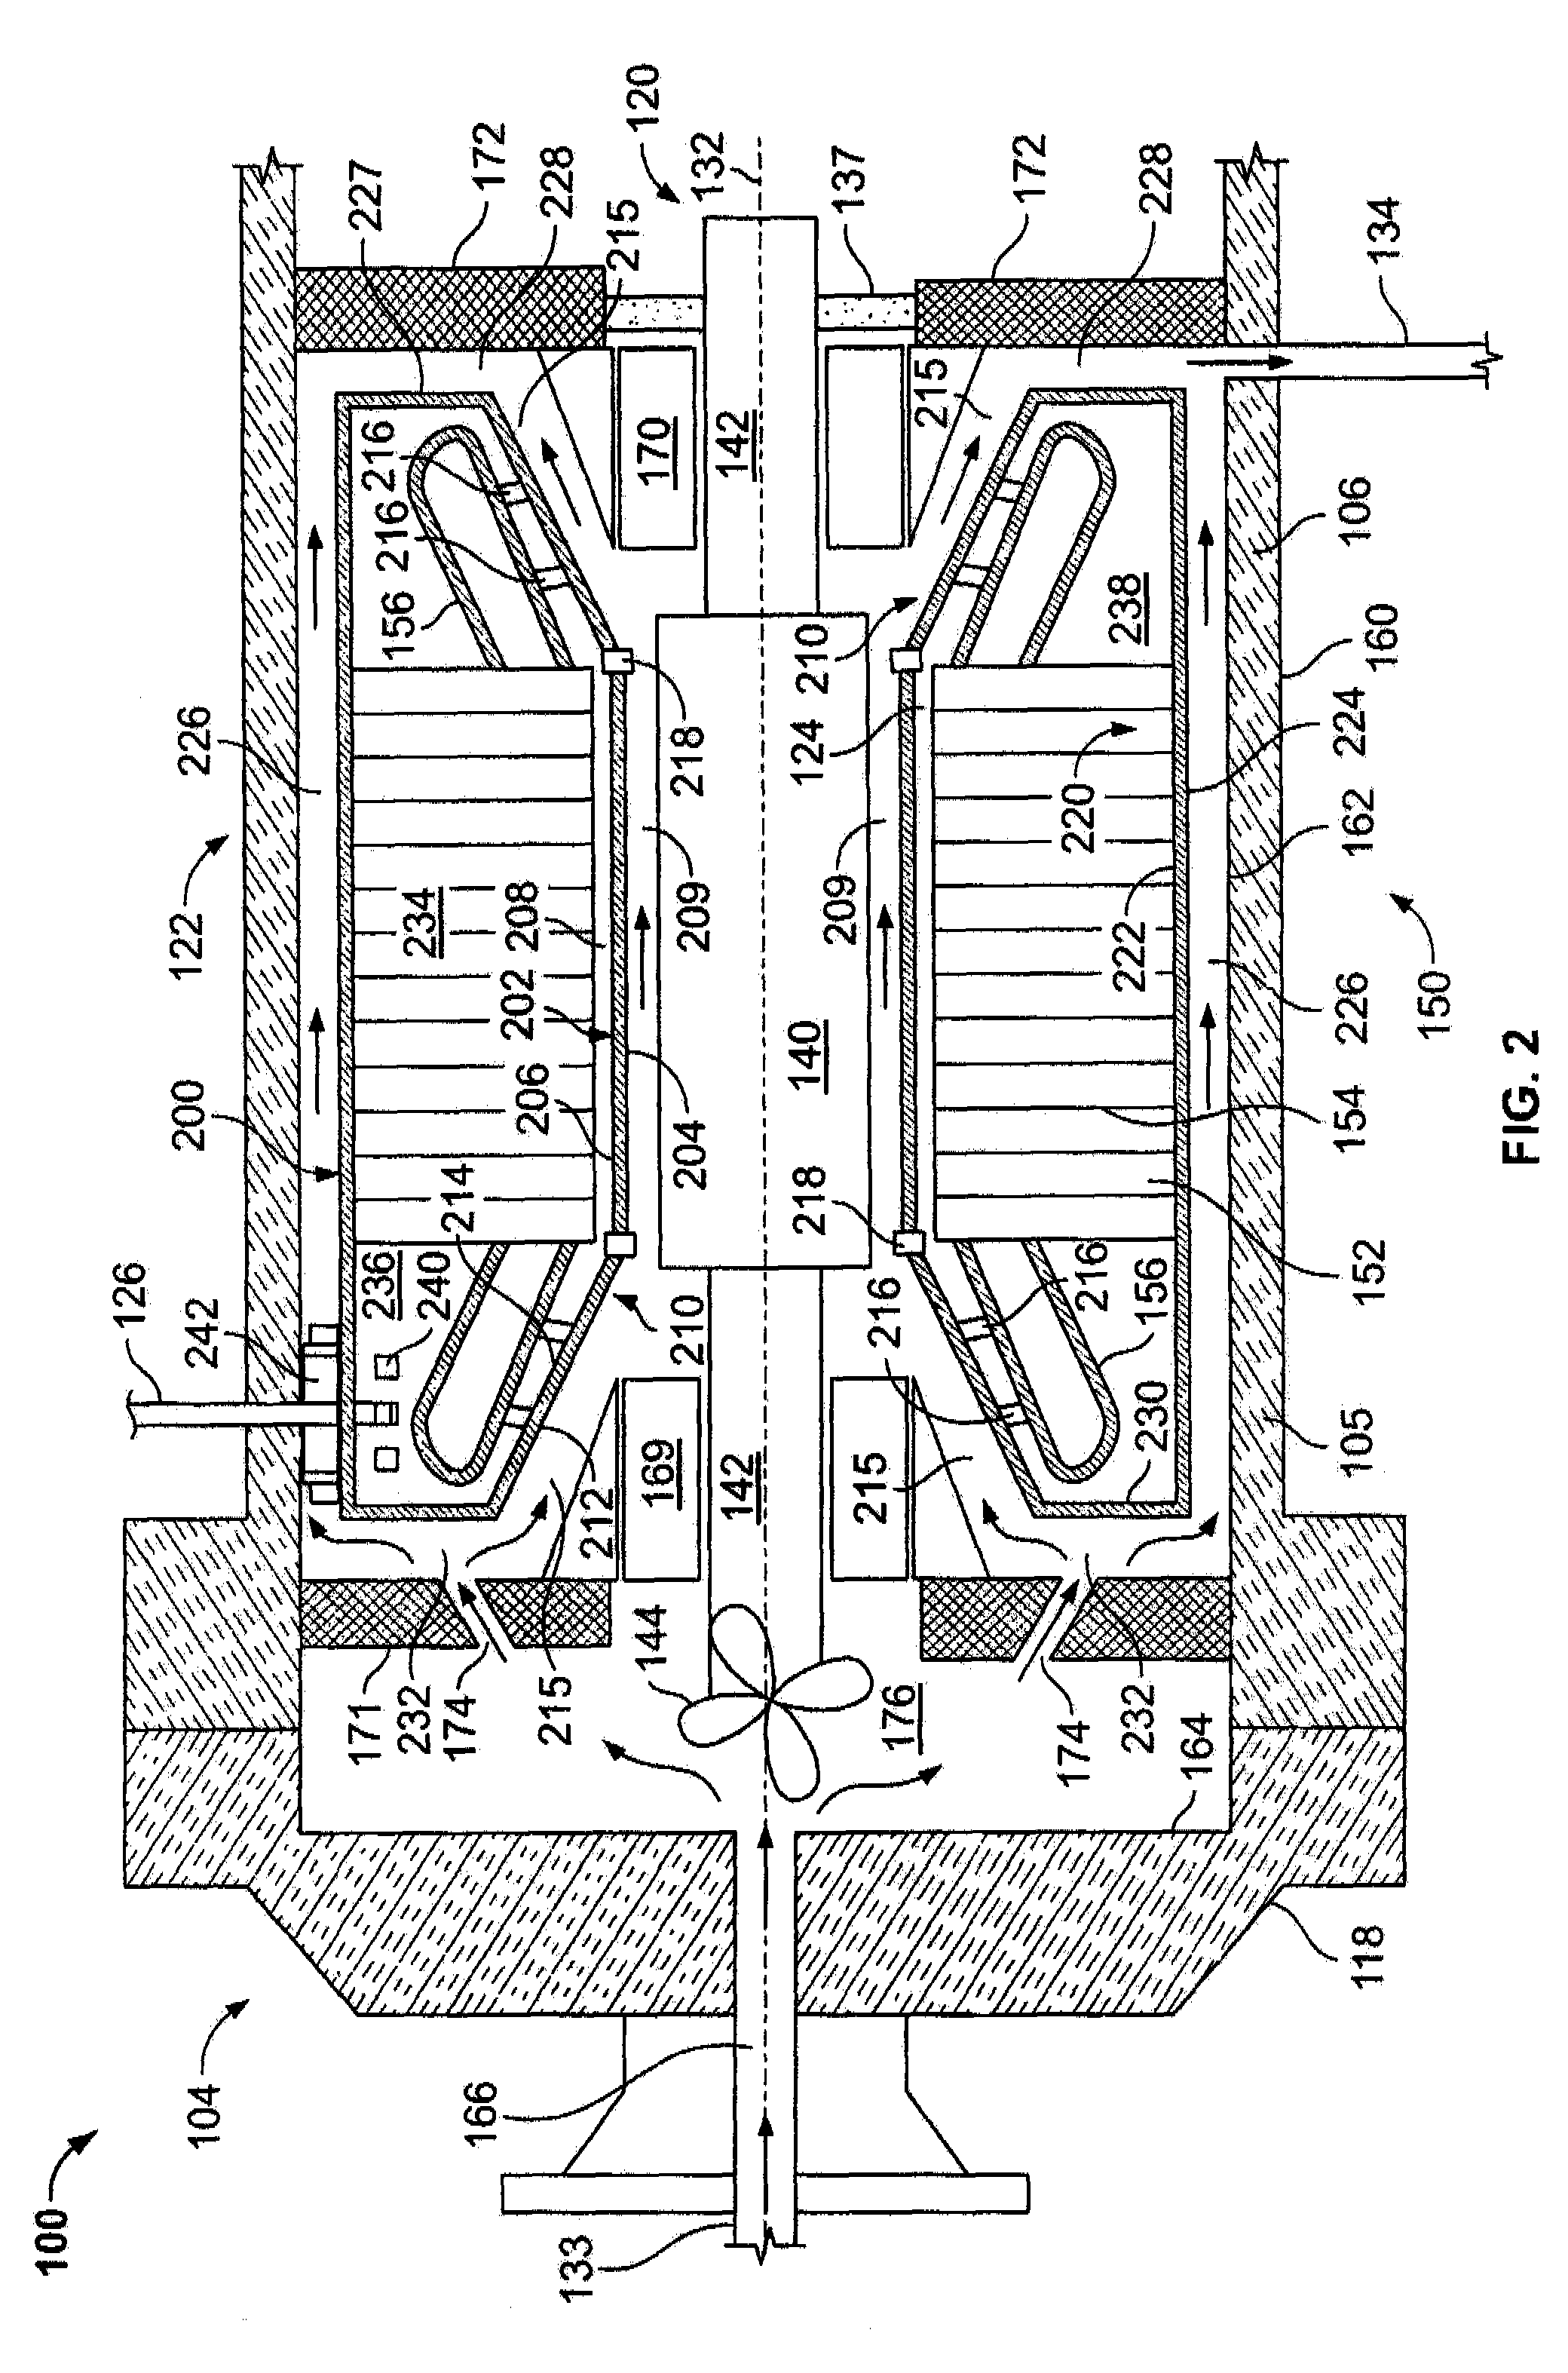 Methods and apparatus for using an electrical machine to transport fluids through a pipeline